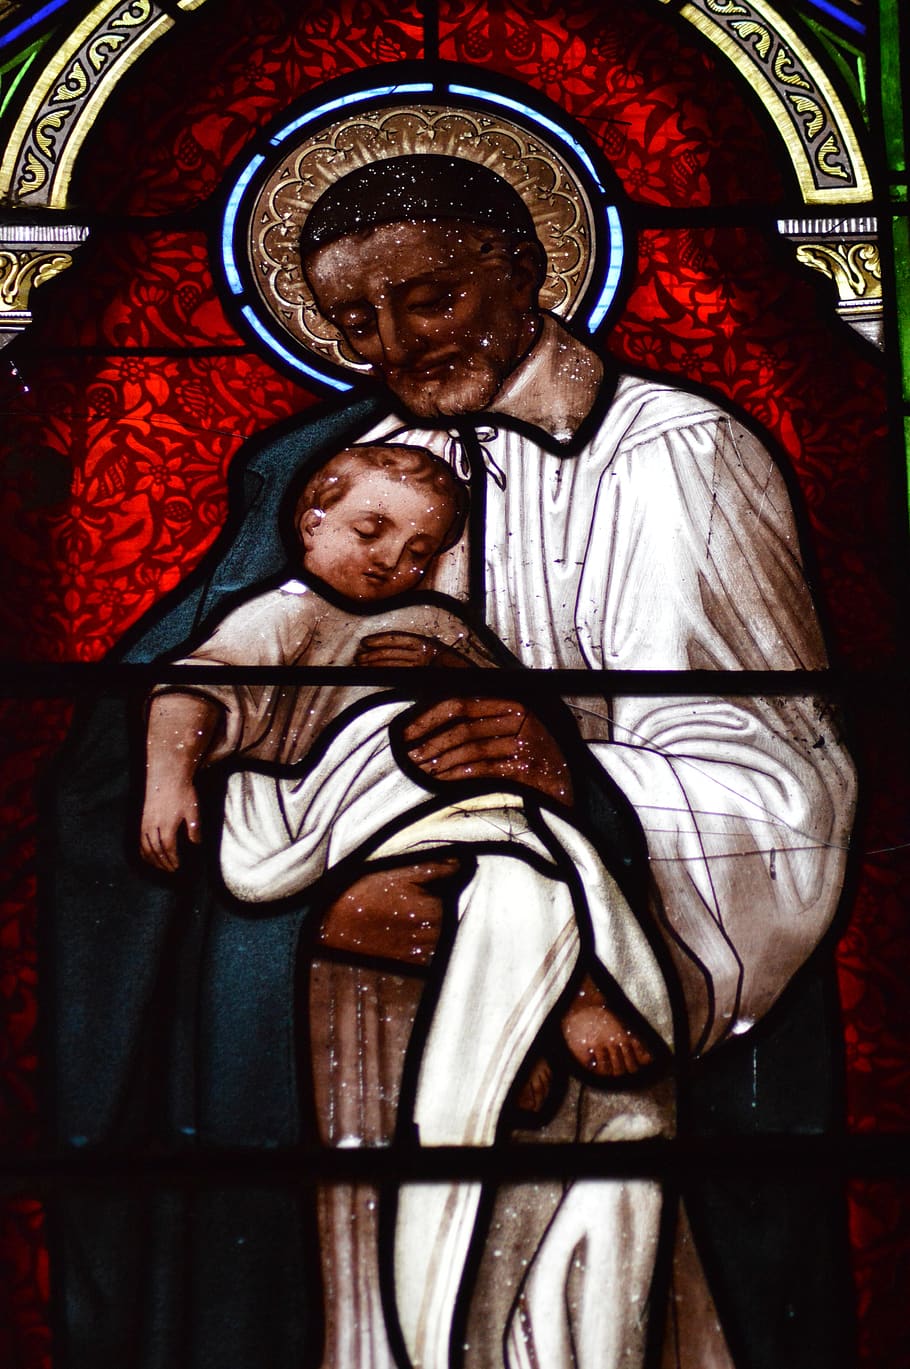 stained glass, people, baby, man, saint, vincent de paul, halo, priest, unfortunate, the oppressed